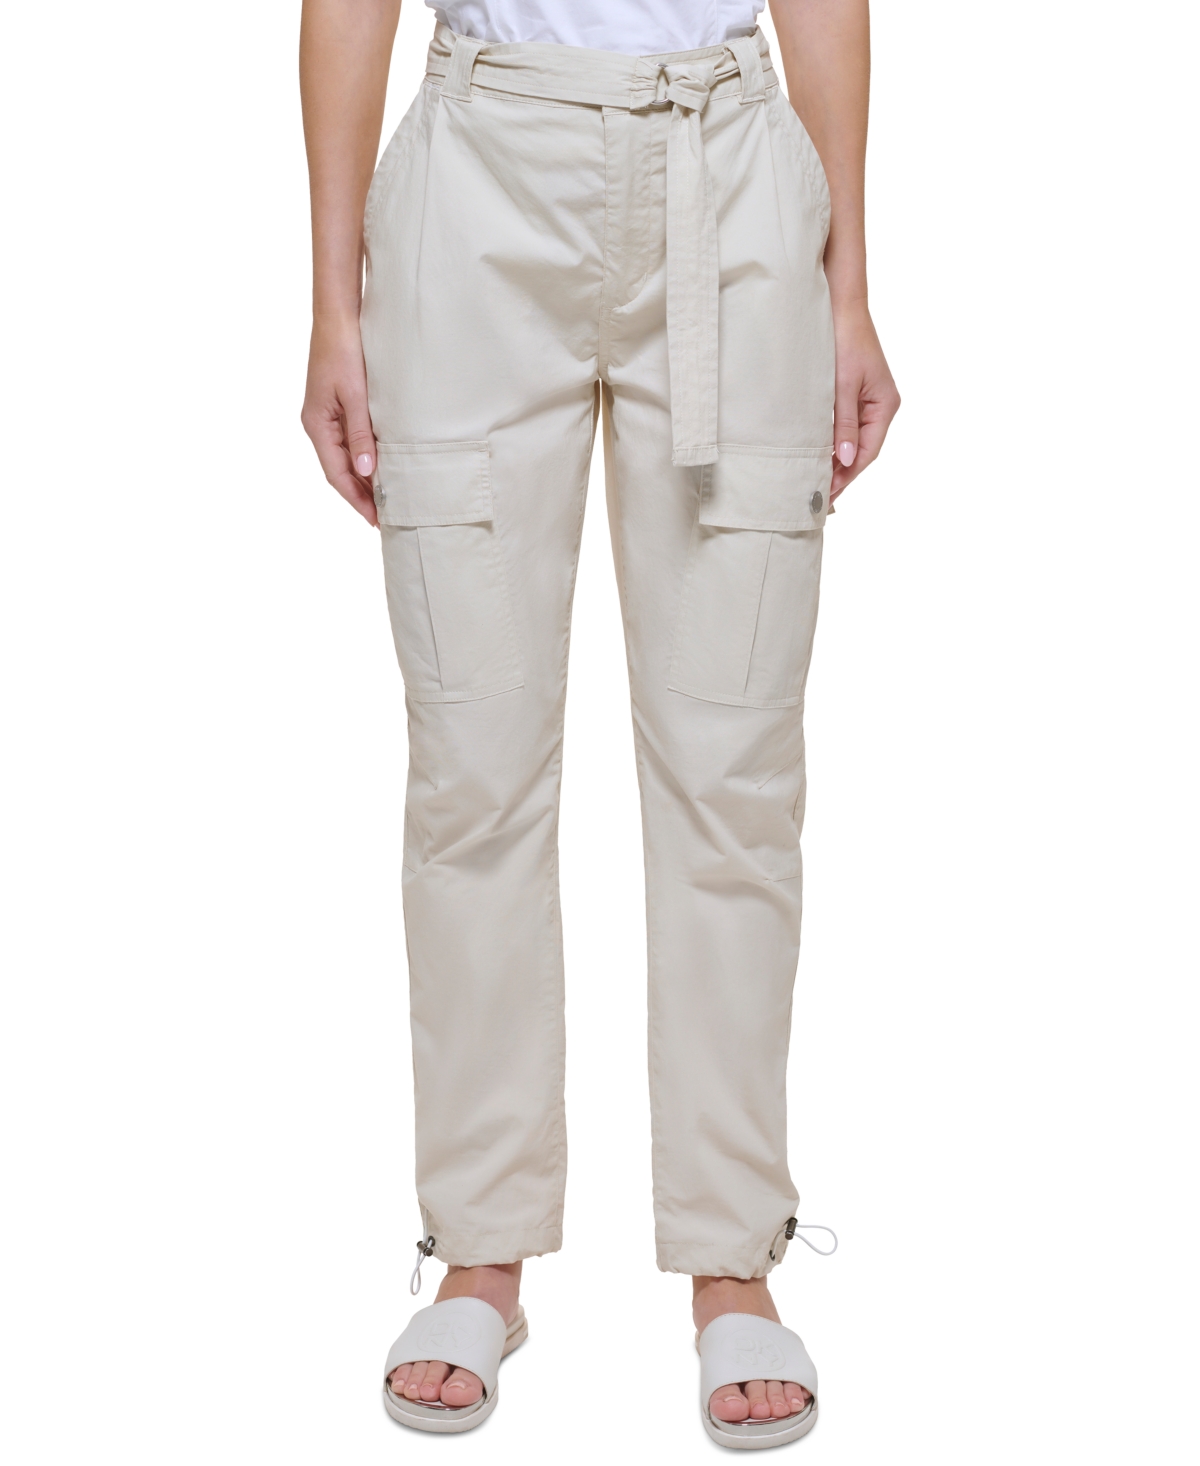 Dkny Jeans Women's High-Rise Belted Straight-Leg Cargo Pants